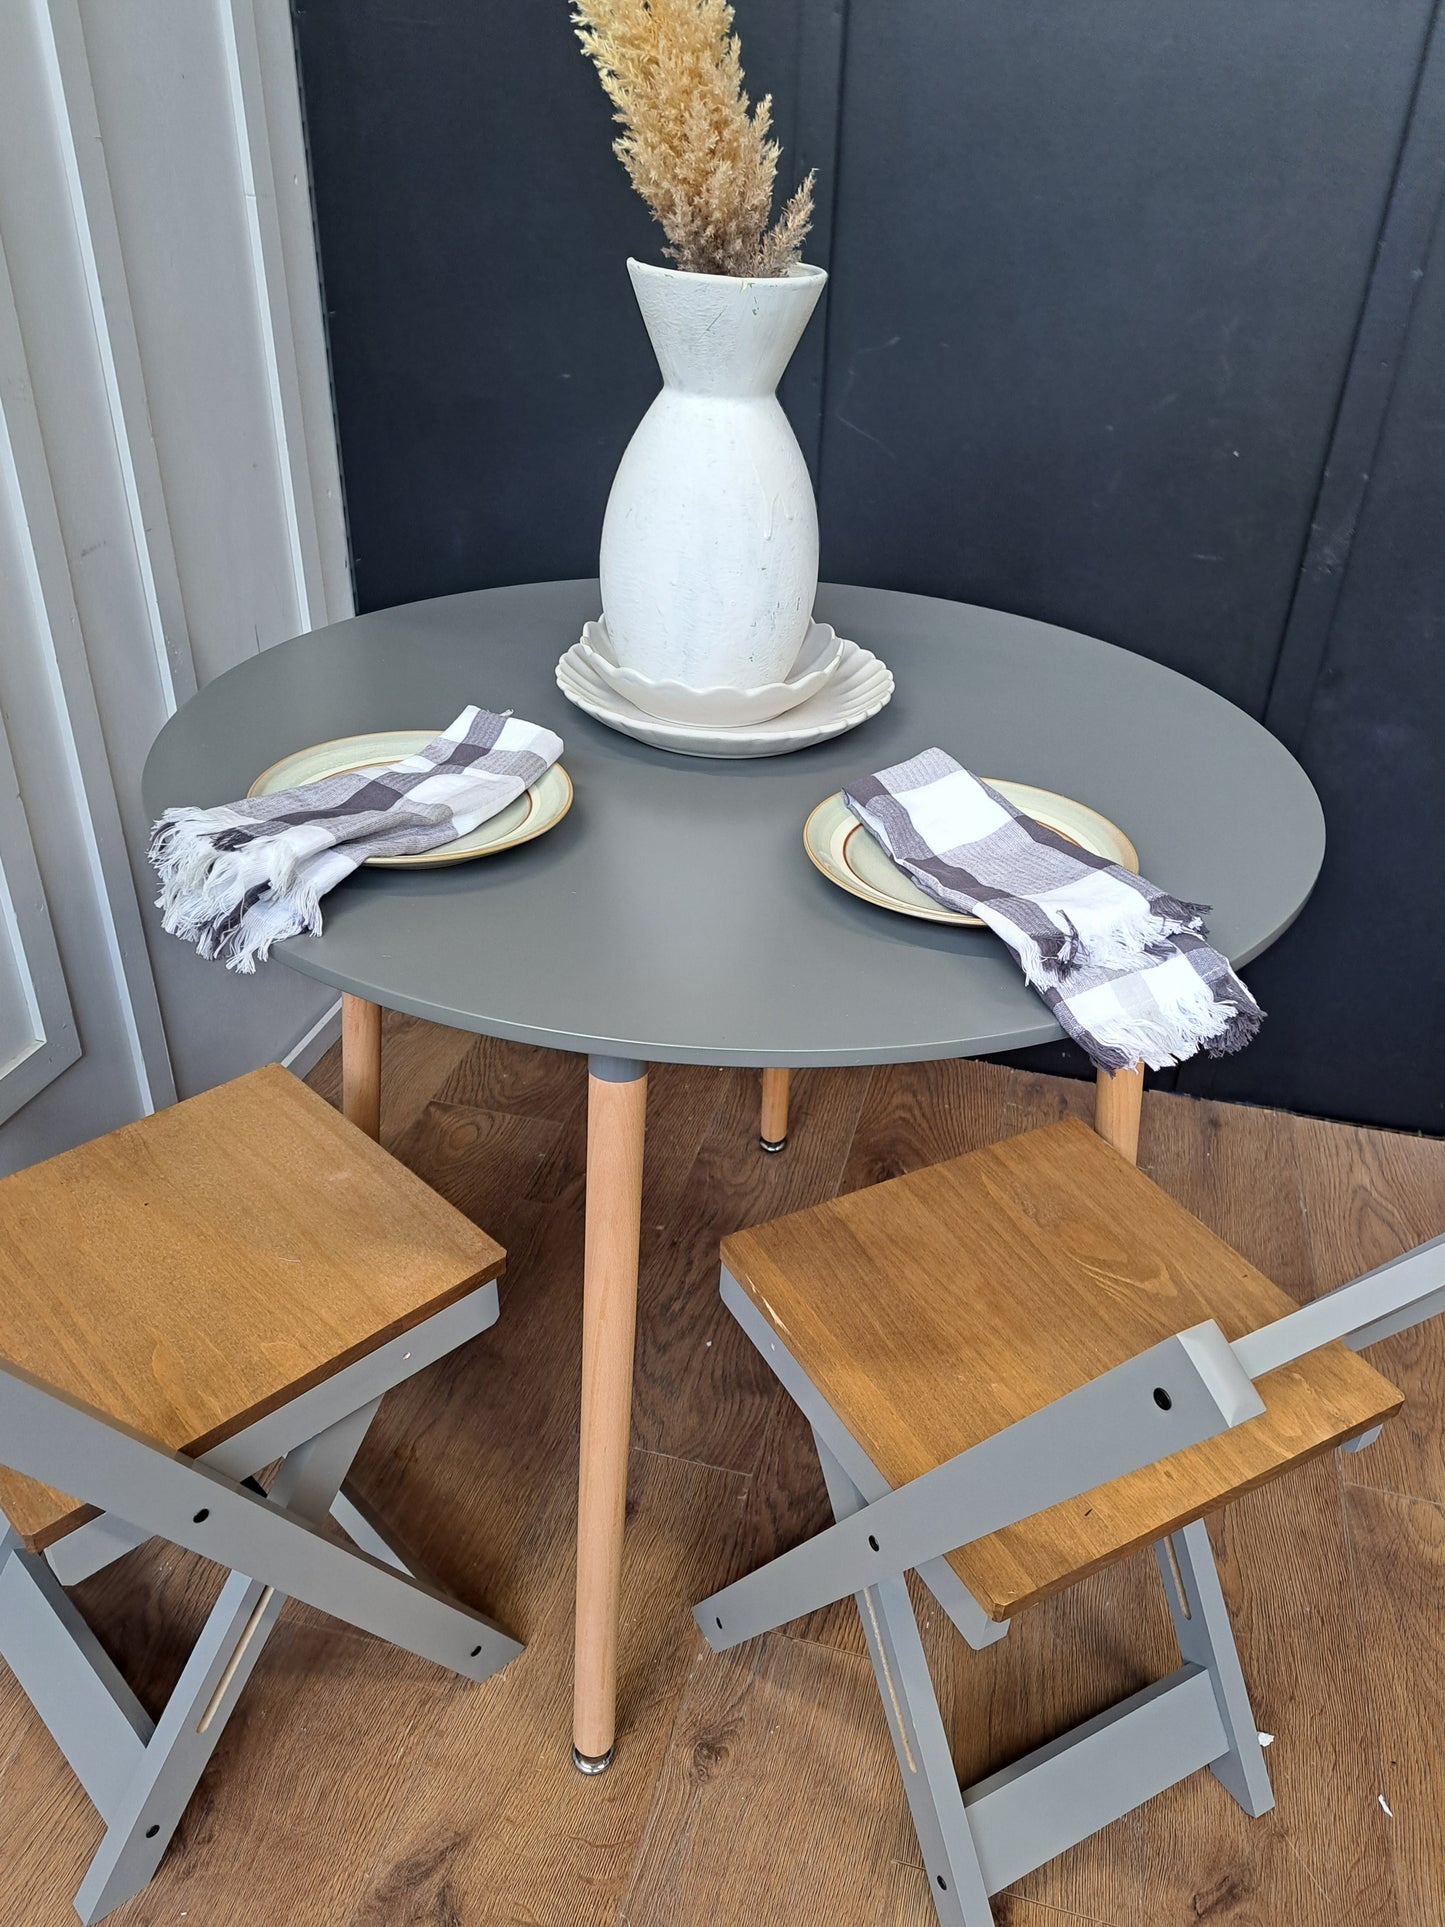 Grey and solid wood circular round dining table